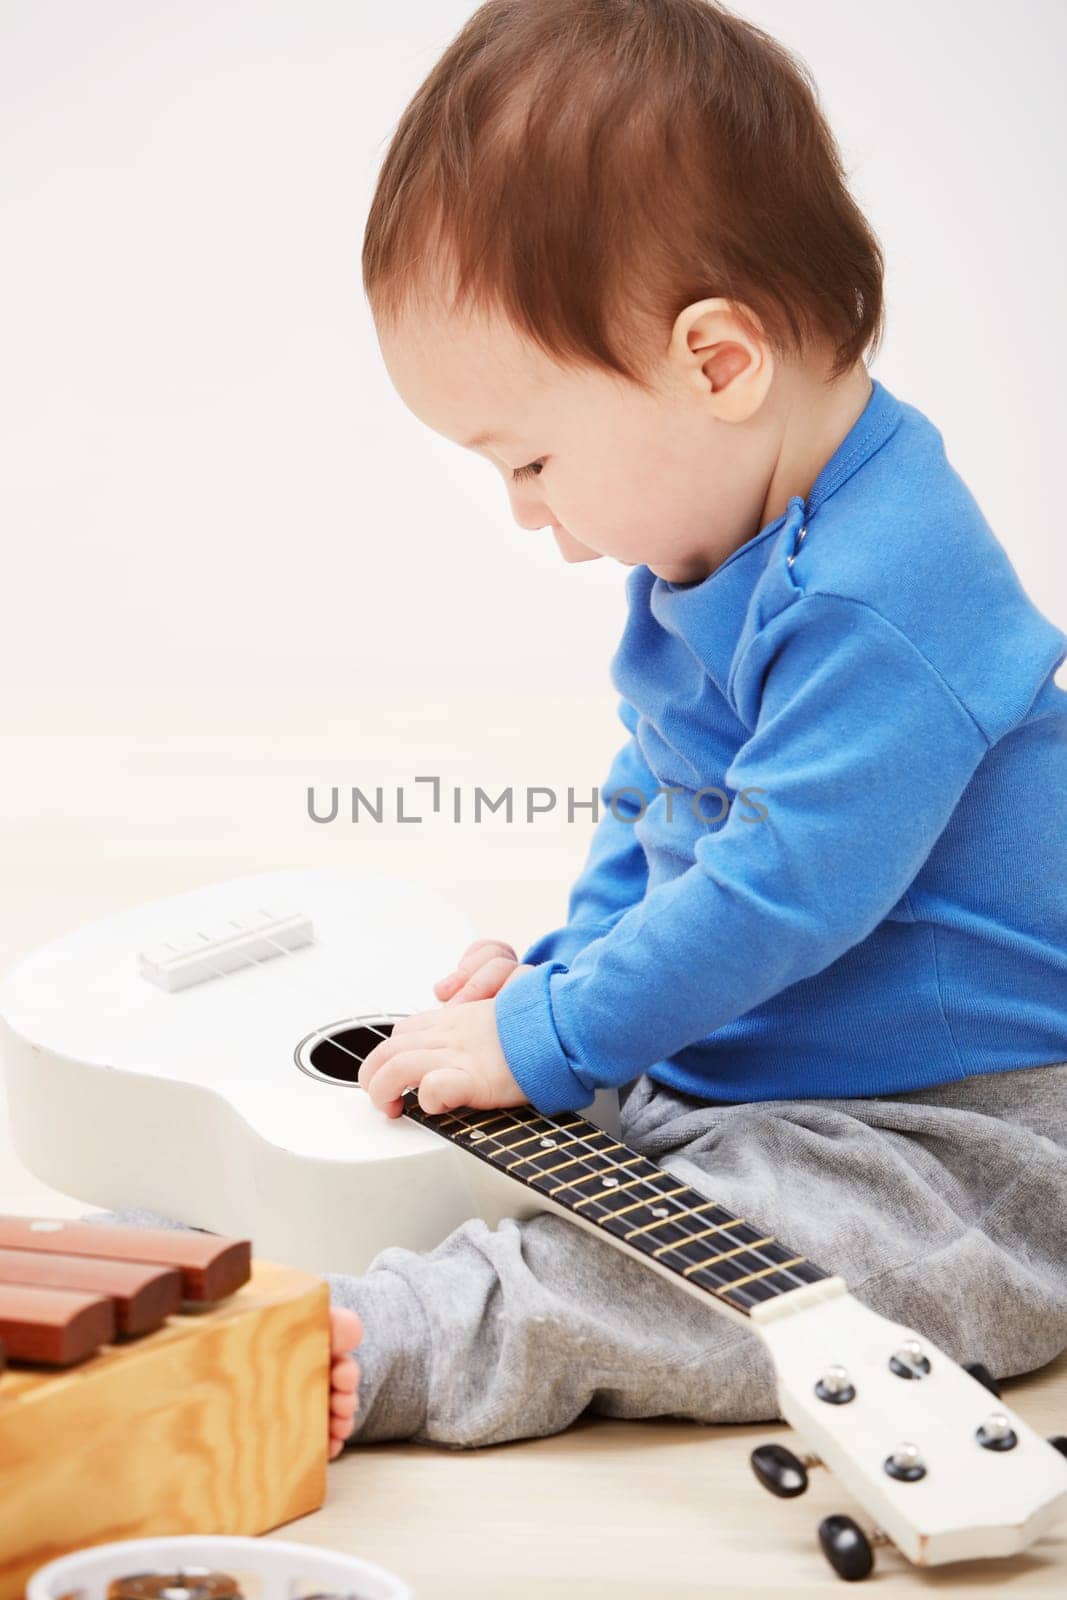 Baby, guitar toys and play in home for entertainment joy, childhood development or education. Boy, kid and instruments for musical strings for song learning in apartment or growing, progress or games by YuriArcurs